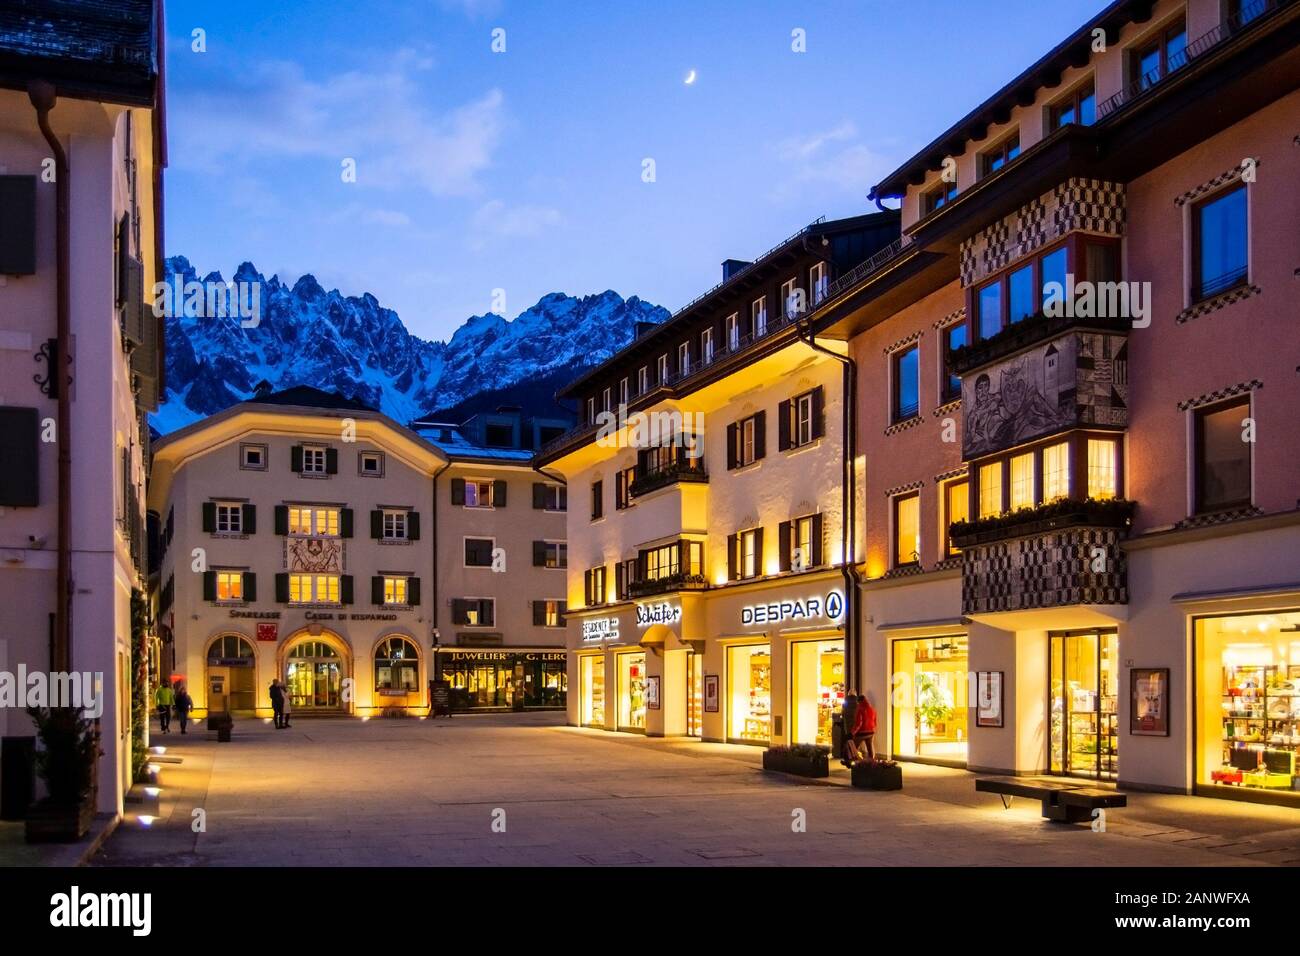 San Candido / Innichen by night in South Tyrol / Alto Adige, Italy during winter season Stock Photo